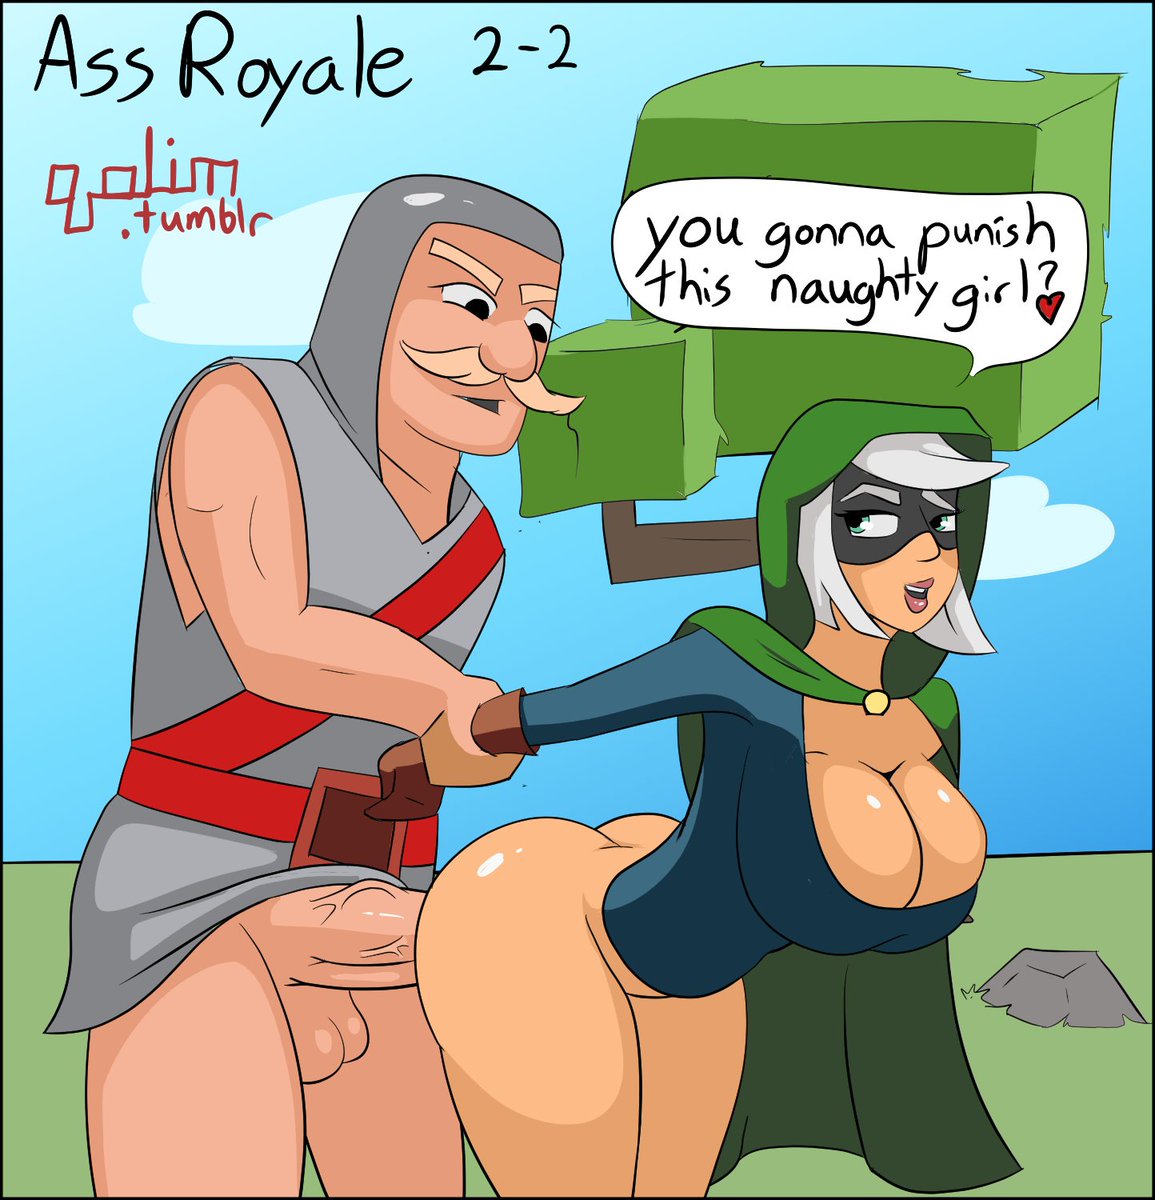 Older comic i did back when i was really into #clashroyale.